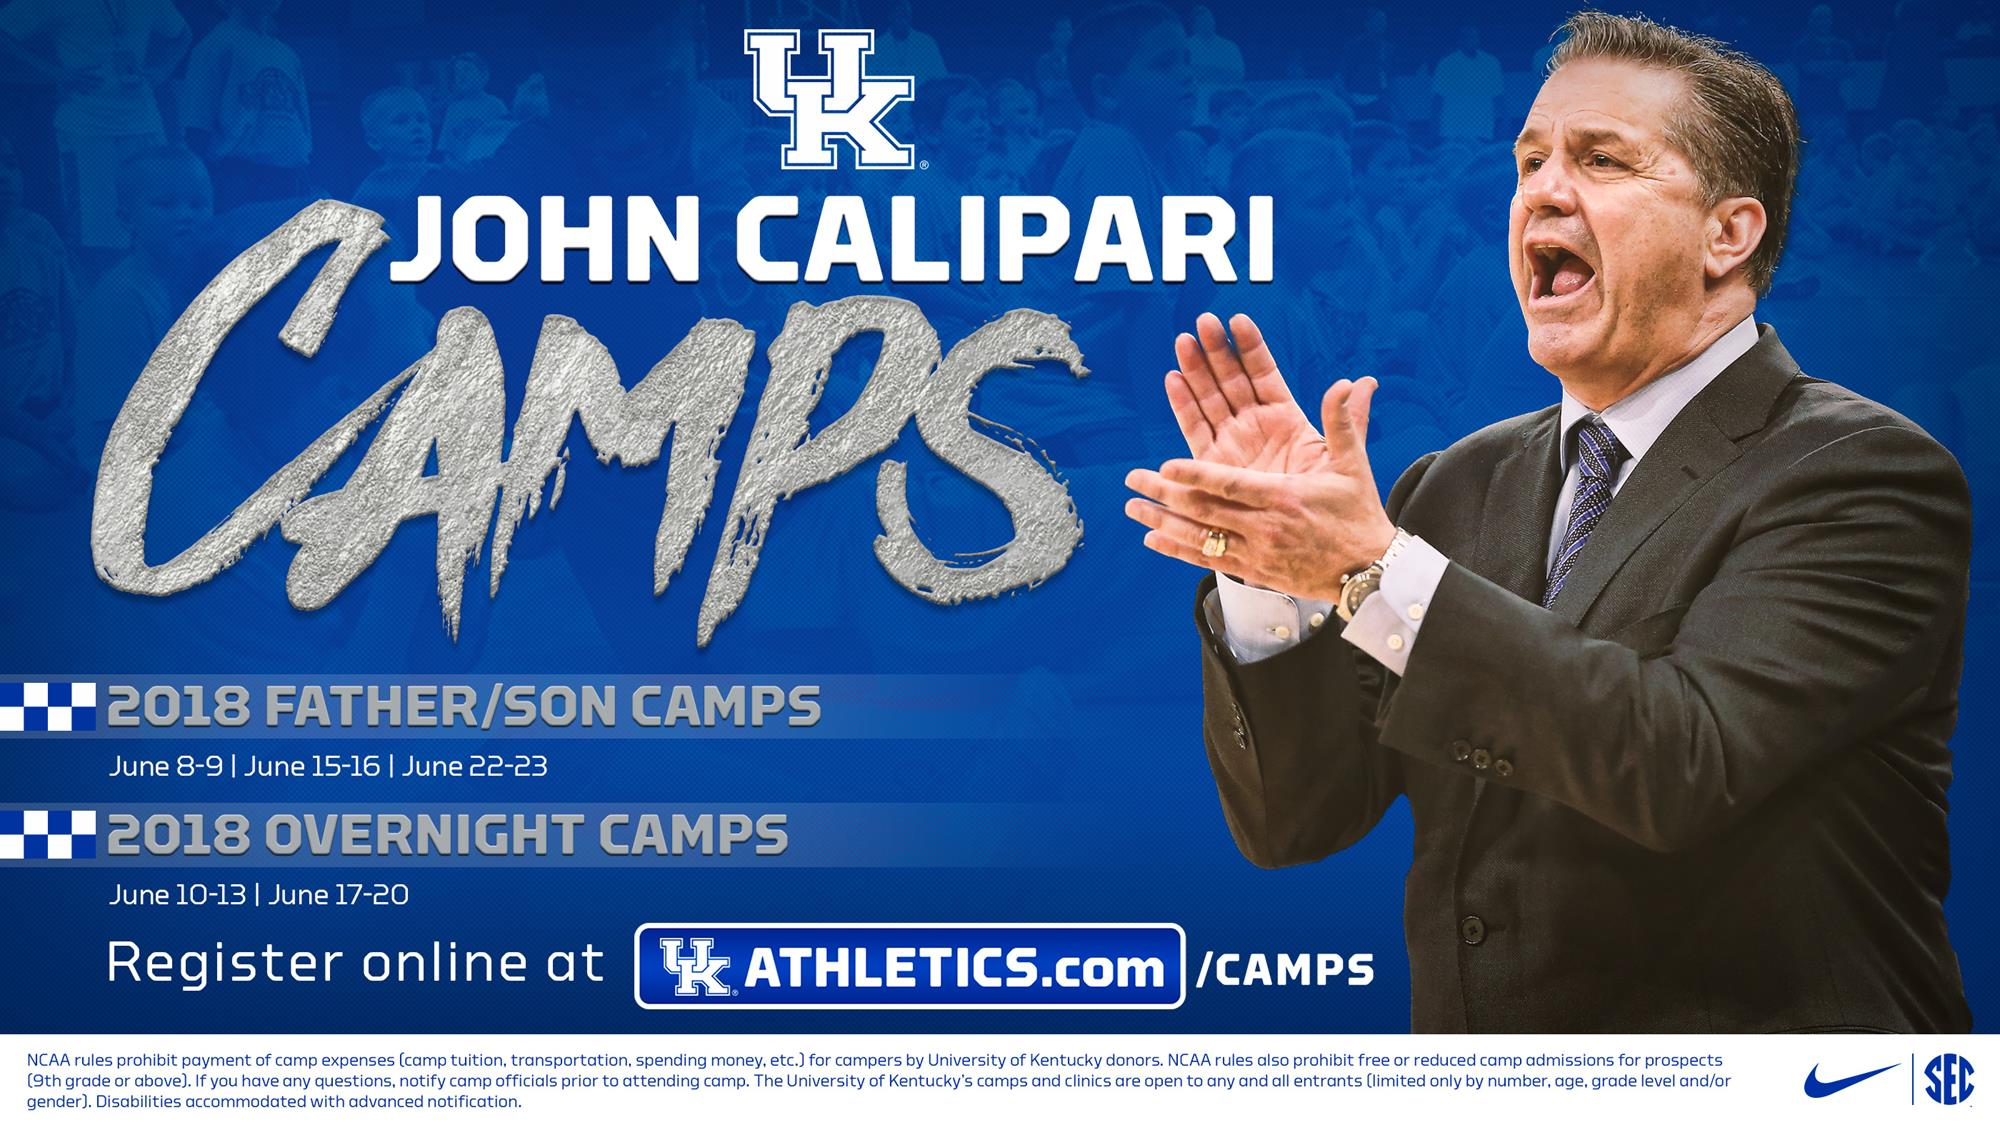 Dates for 2018 Father/Son and Overnight Camps Set